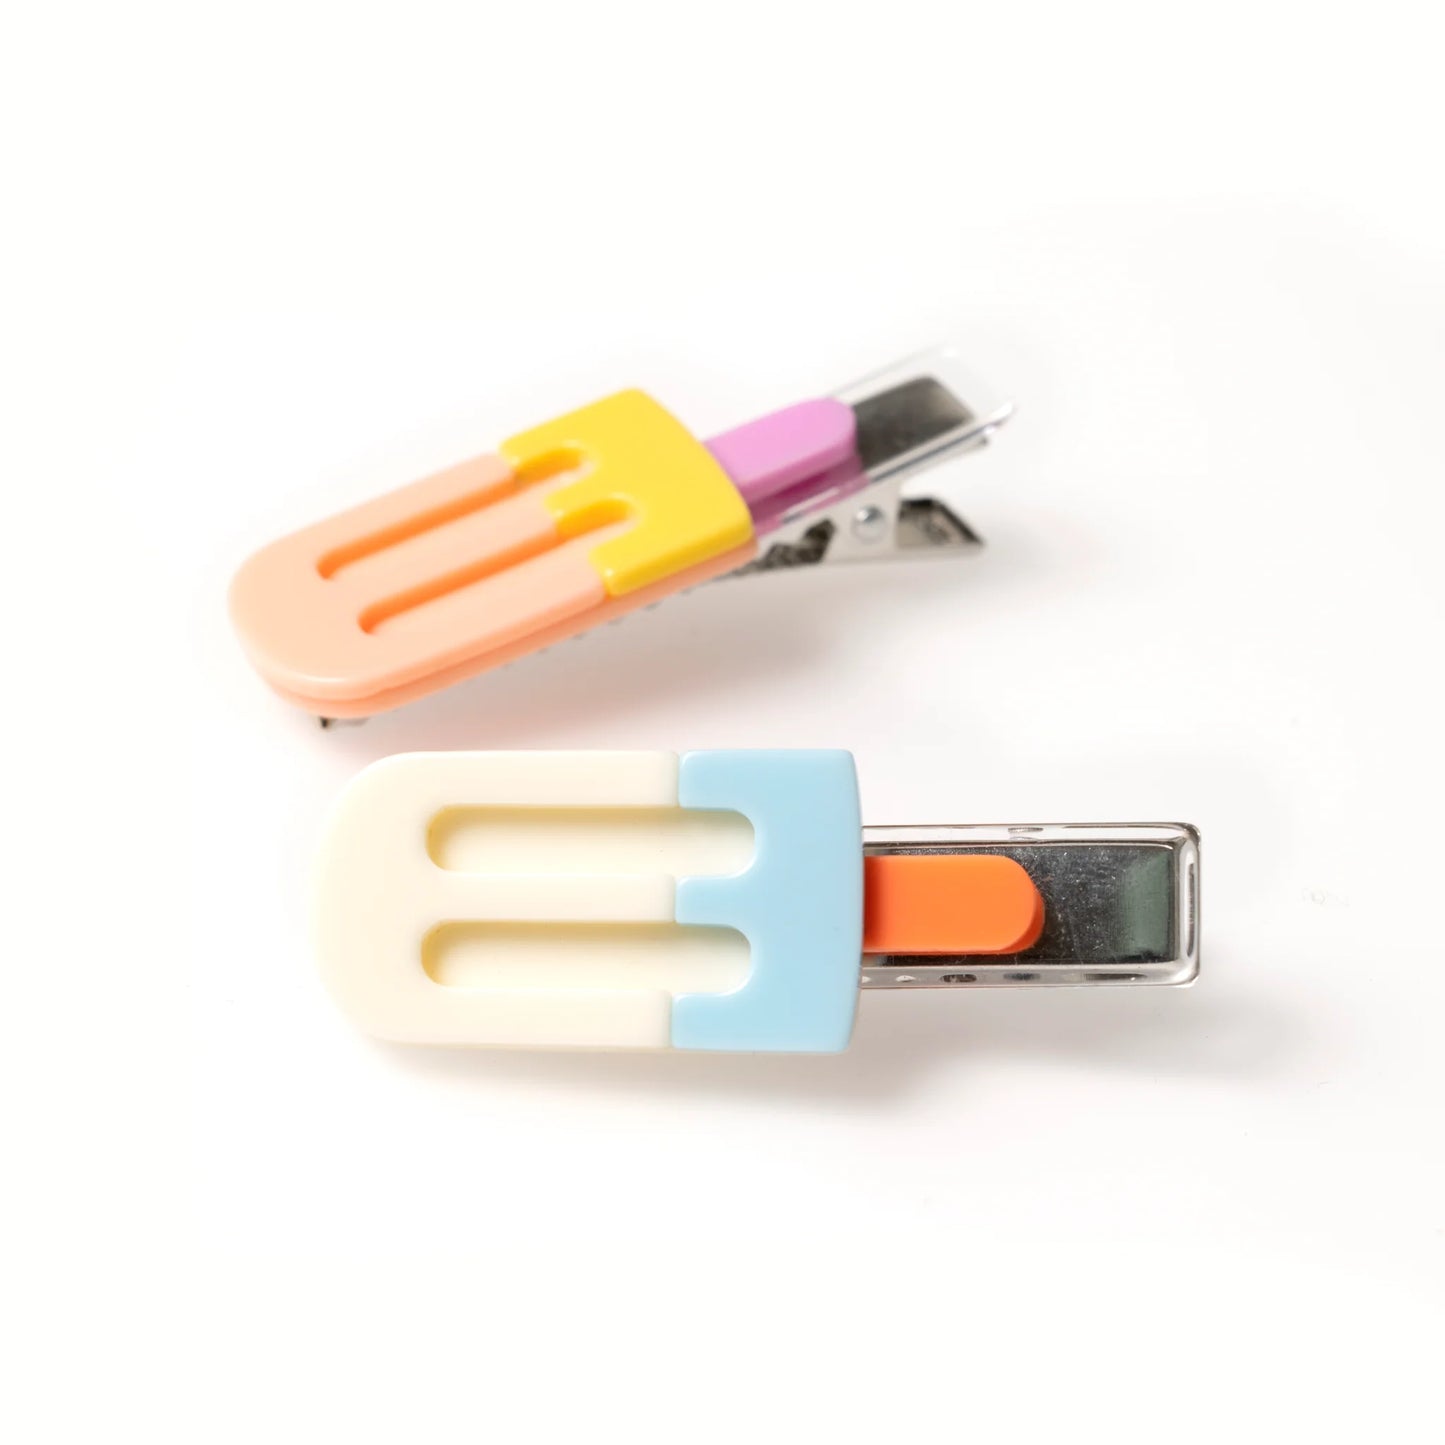 Popsicle Papaya Cream Alligator Clips (Set of 2) - Lilies and Roses